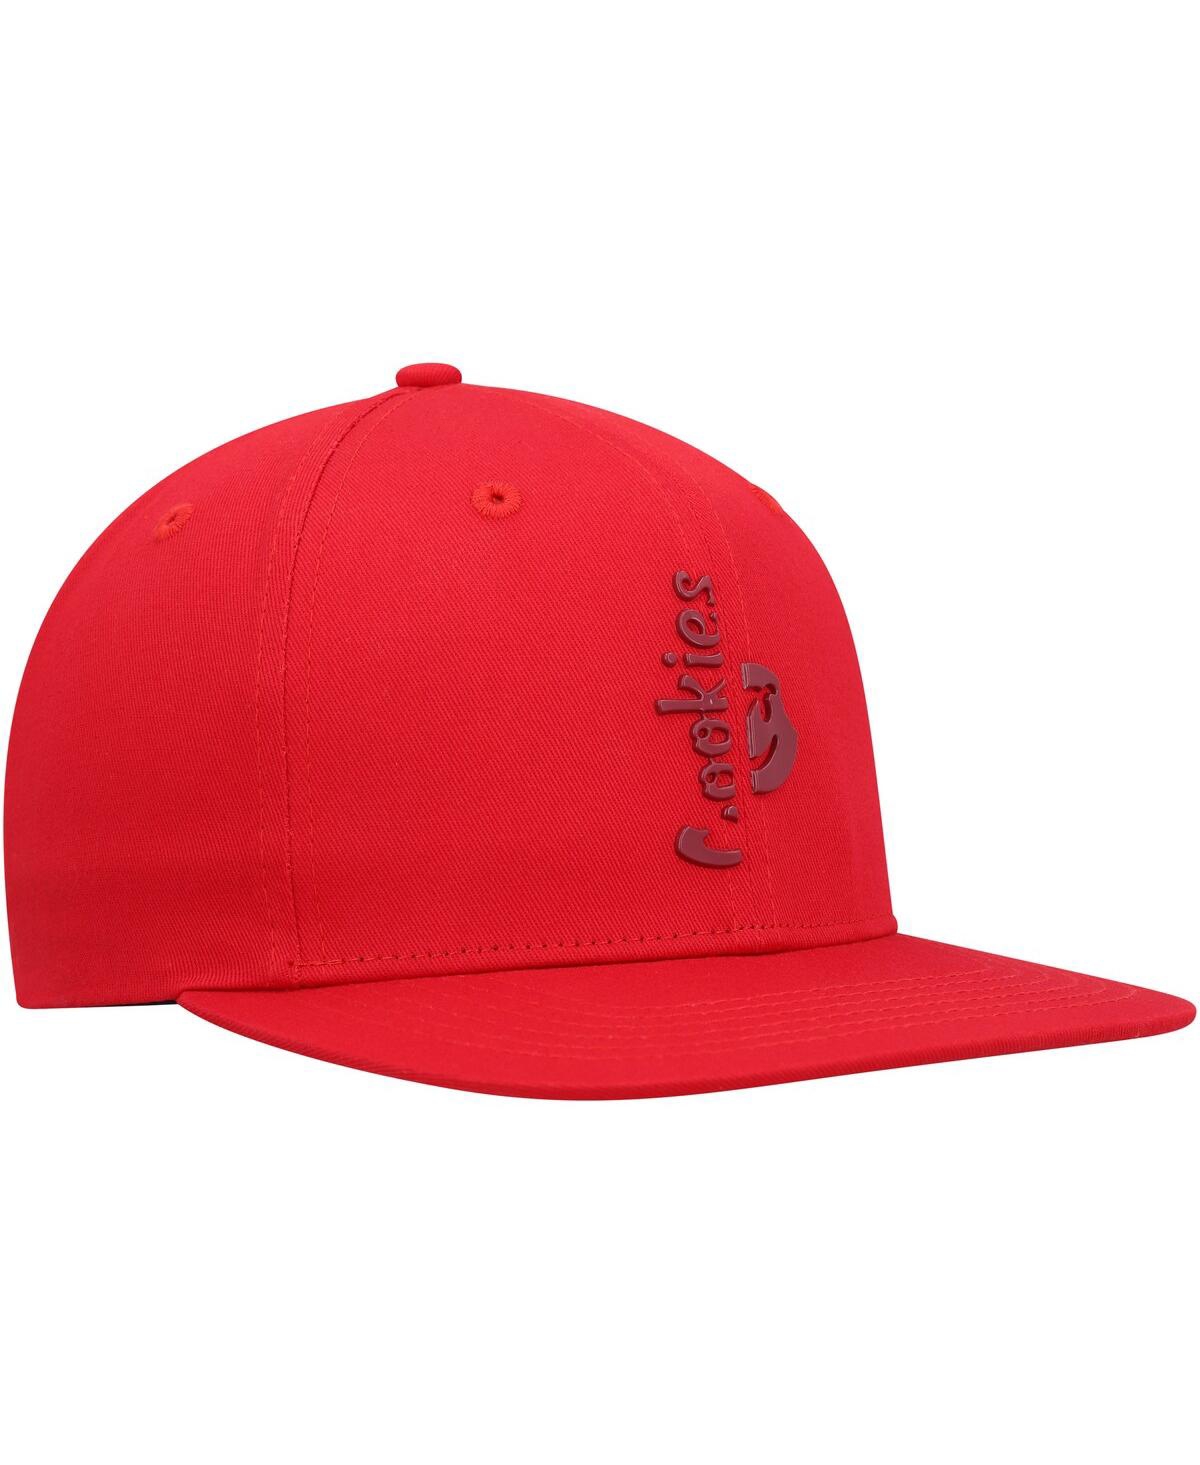 Shop Cookies Men's  Red Searchlight Snapback Hat